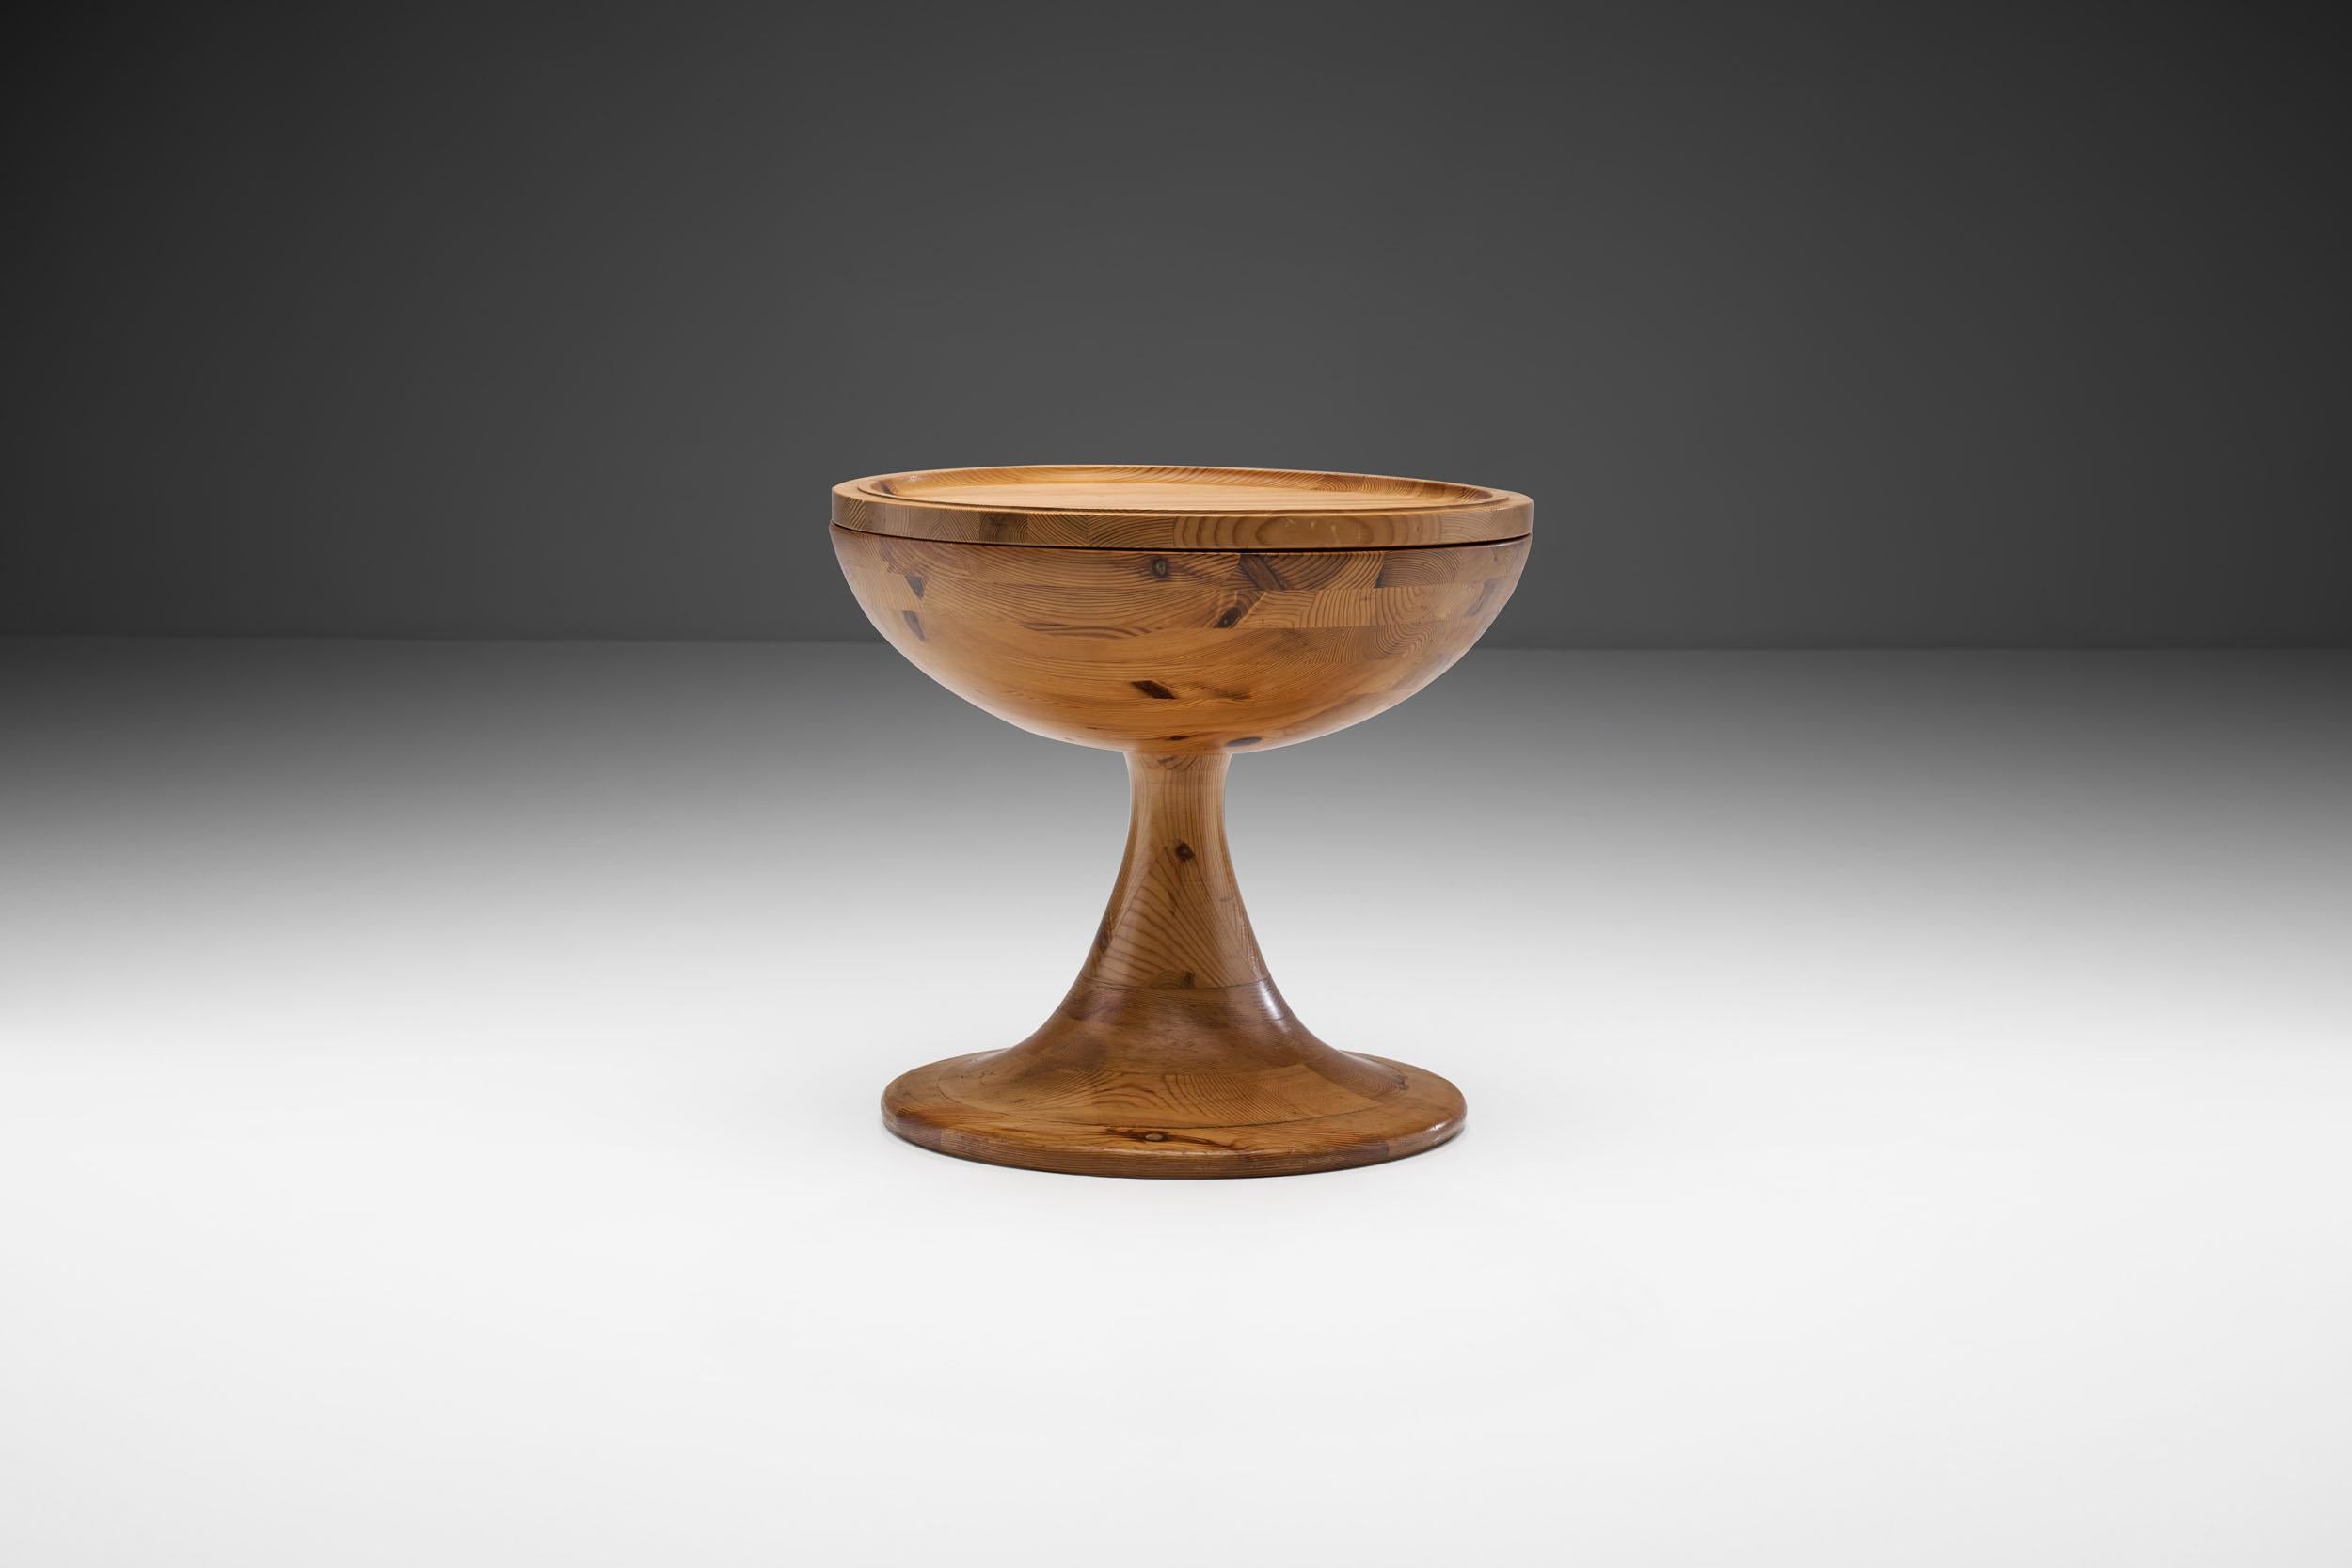 This unique solid pine table is quite elemental in its design despite its humble size. Functional and distinctive, this table stands out as a remarkable piece from the 1970s.

The design is very successful in balancing larger volumes with clean